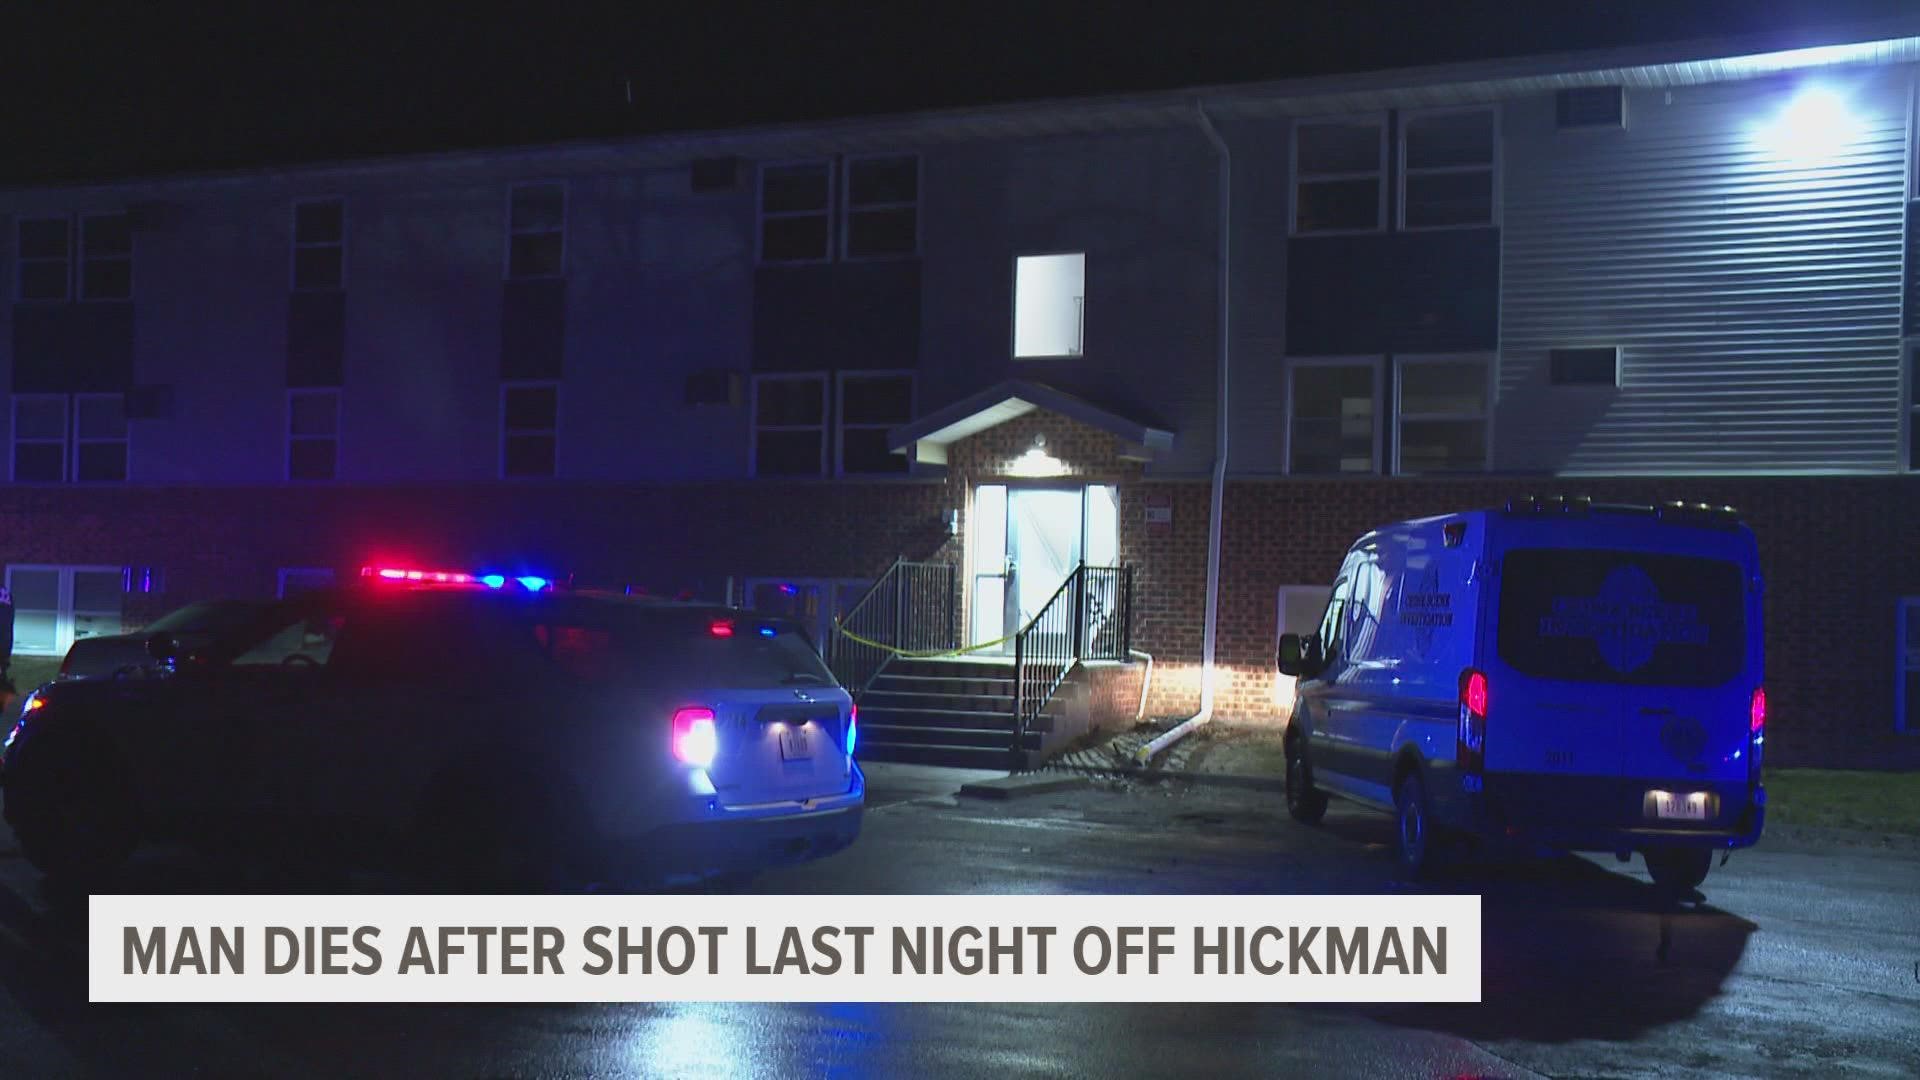 A shooting on Hickman that left one person dead is being investigated as Des Moines's 5th homicide of 2022.